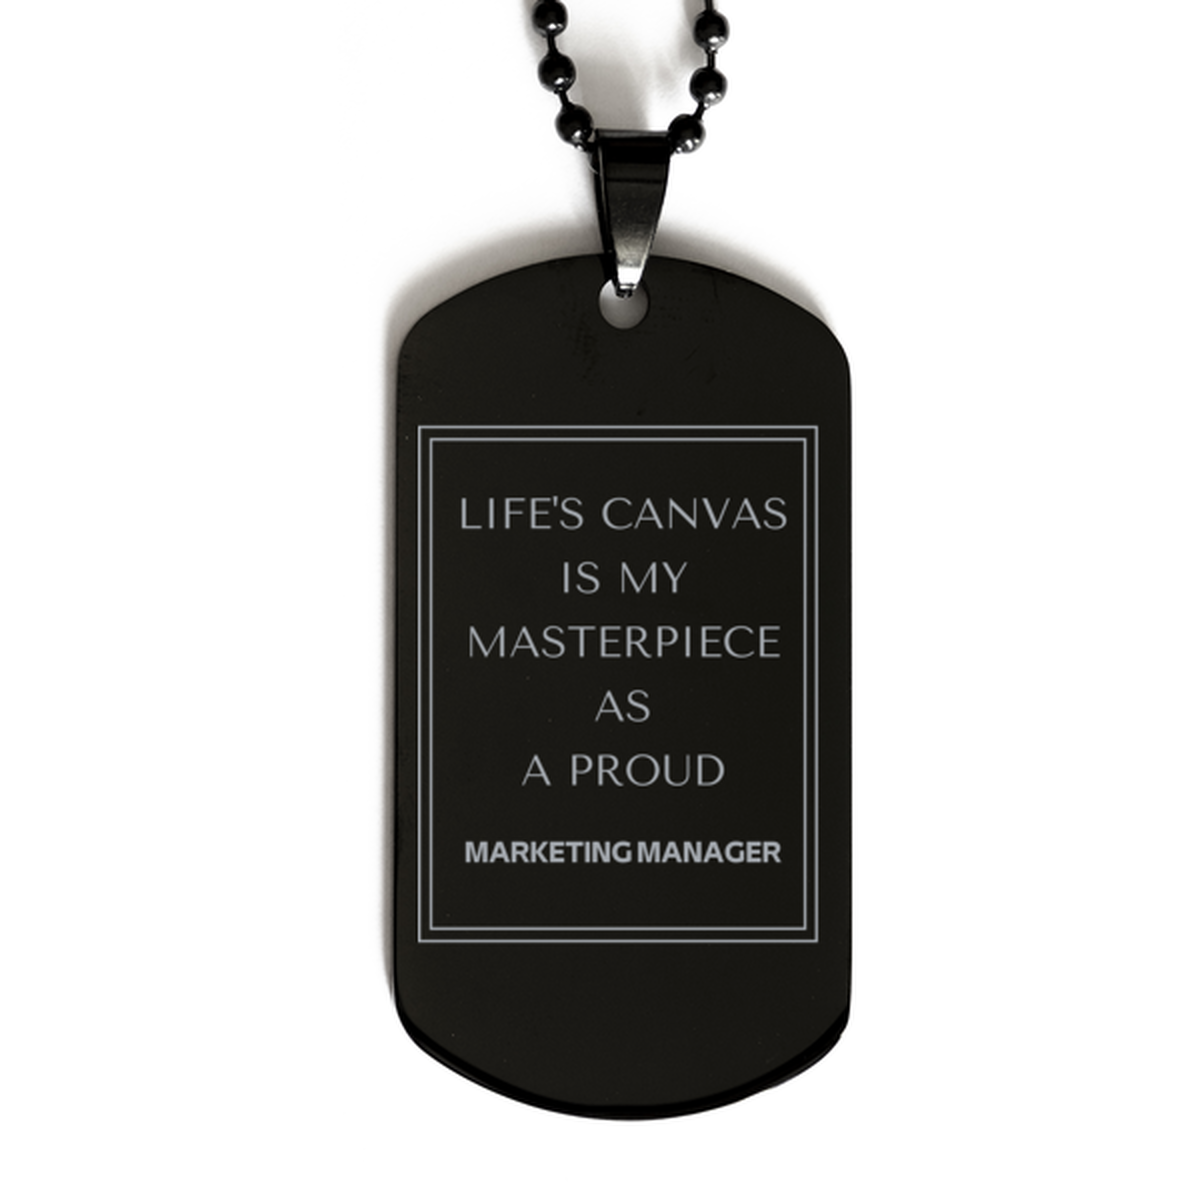 Proud Marketing Manager Gifts, Life's canvas is my masterpiece, Epic Birthday Christmas Unique Black Dog Tag For Marketing Manager, Coworkers, Men, Women, Friends